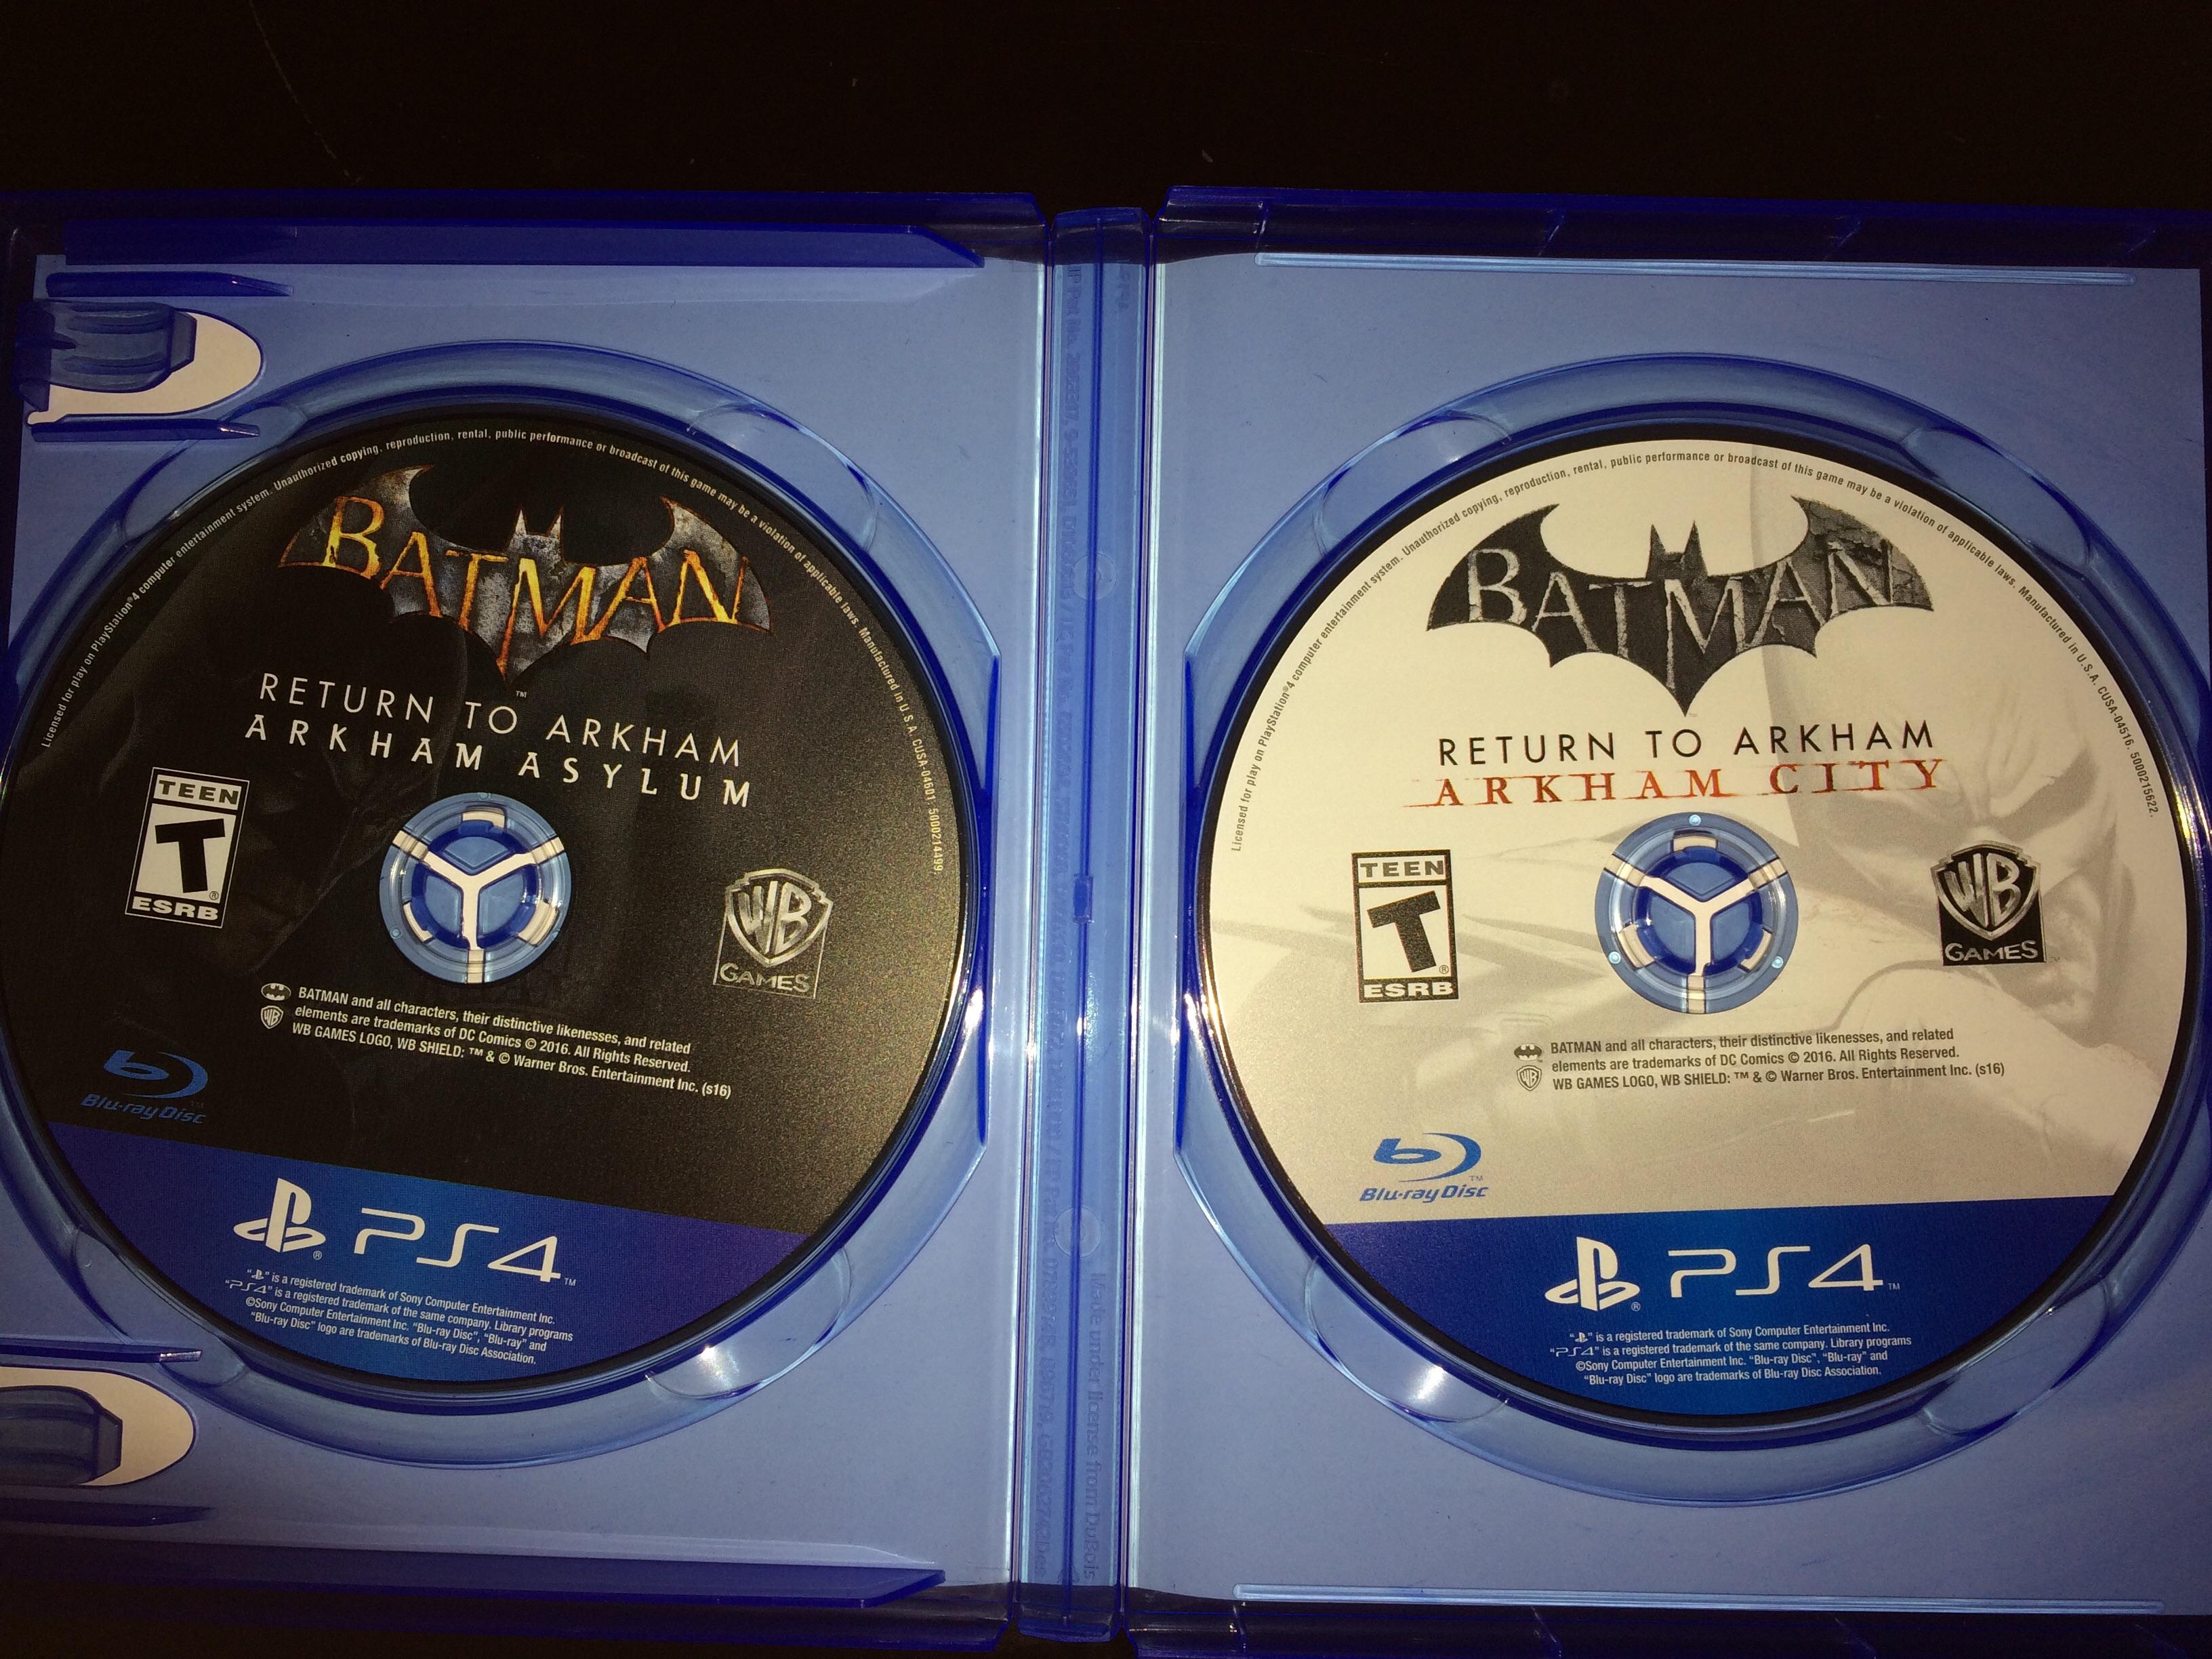 Return to Batman Arkham Logo - I Love How The: “ Return To Arkham Collection” Has 2 Separate Discs ...